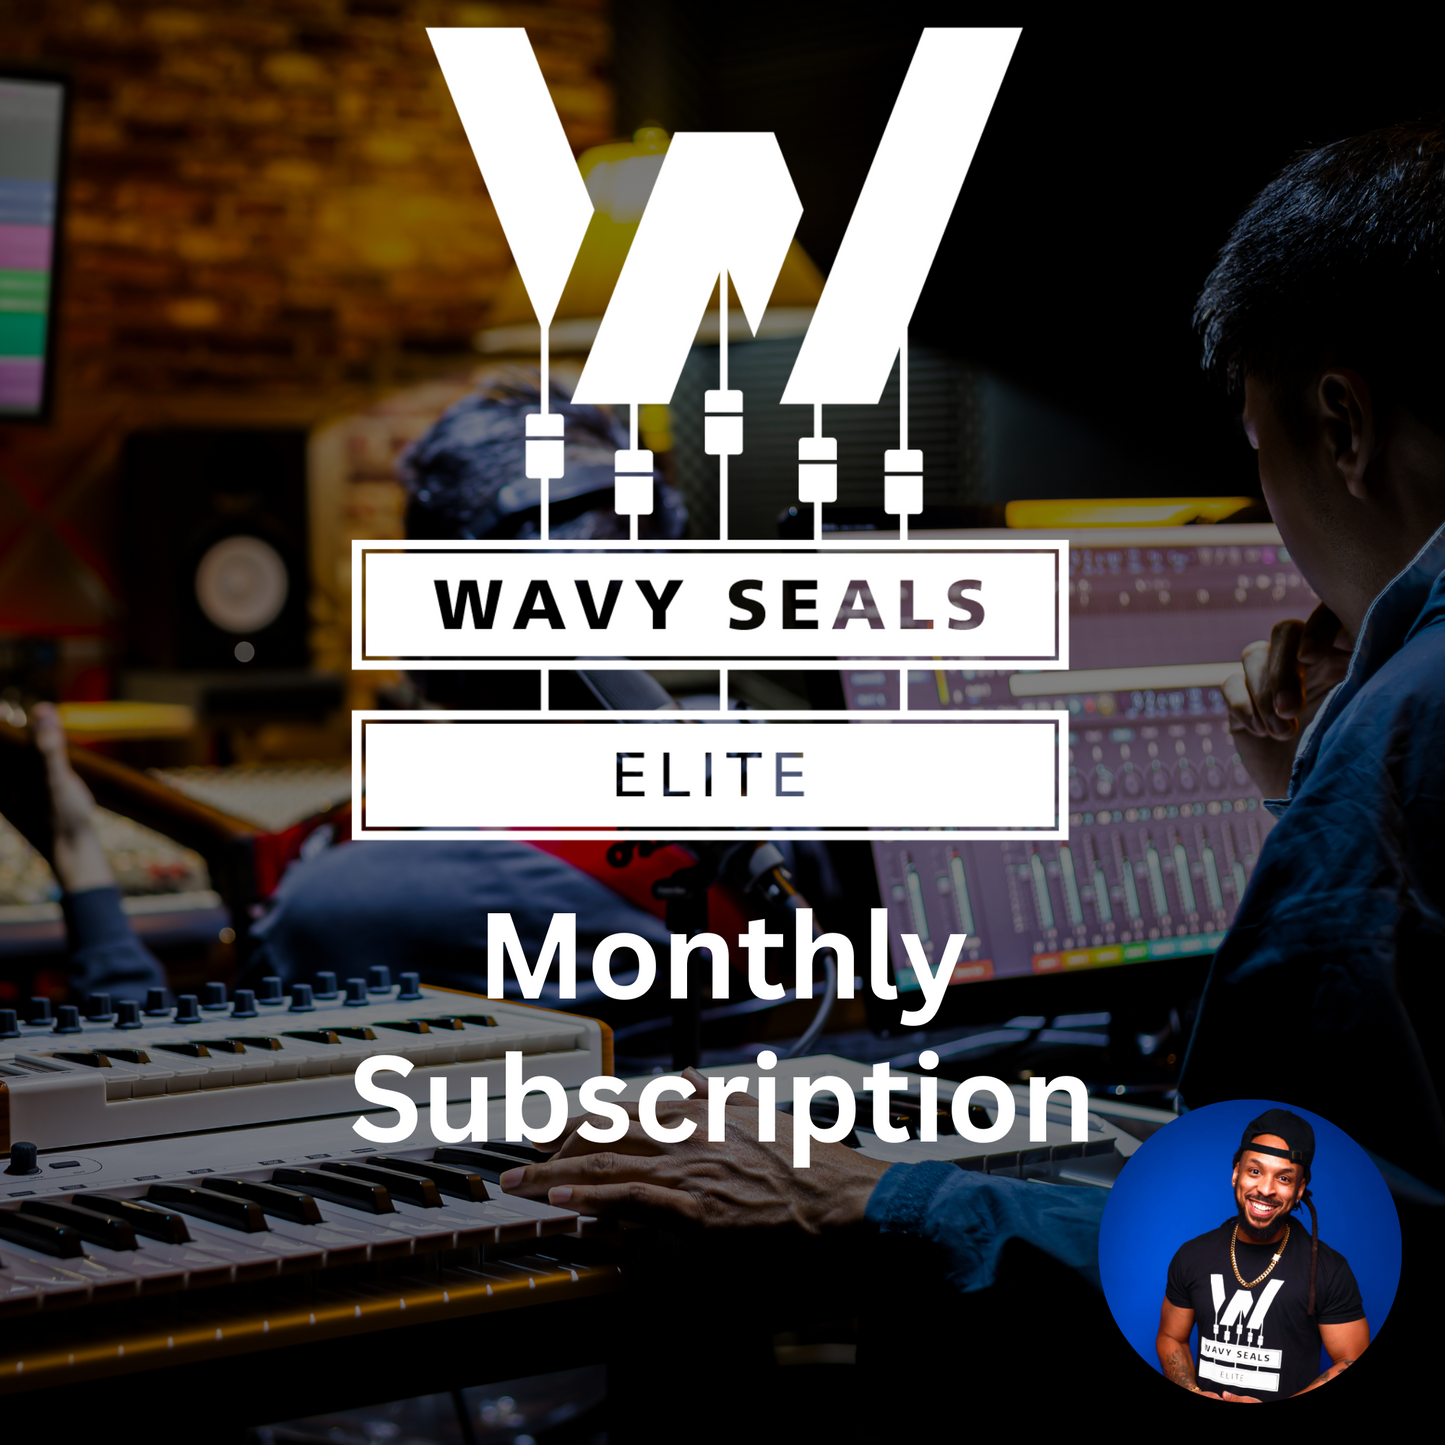 Wavy Seals Elite Monthly Subscription (Automatic Renewal)